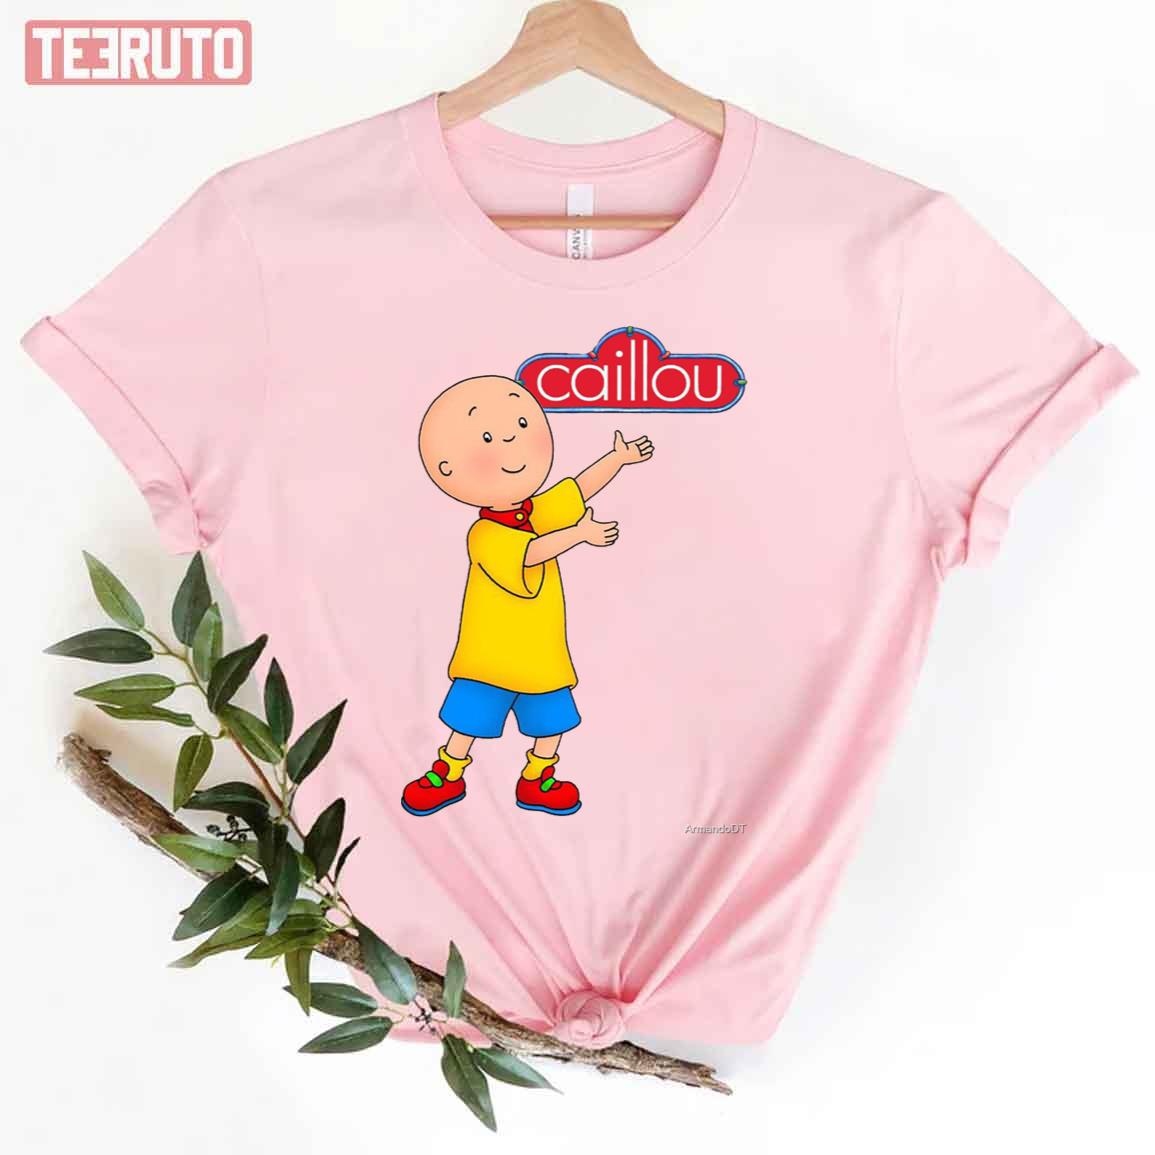 The Hairless Boy Caillou Unisex T-Shirt